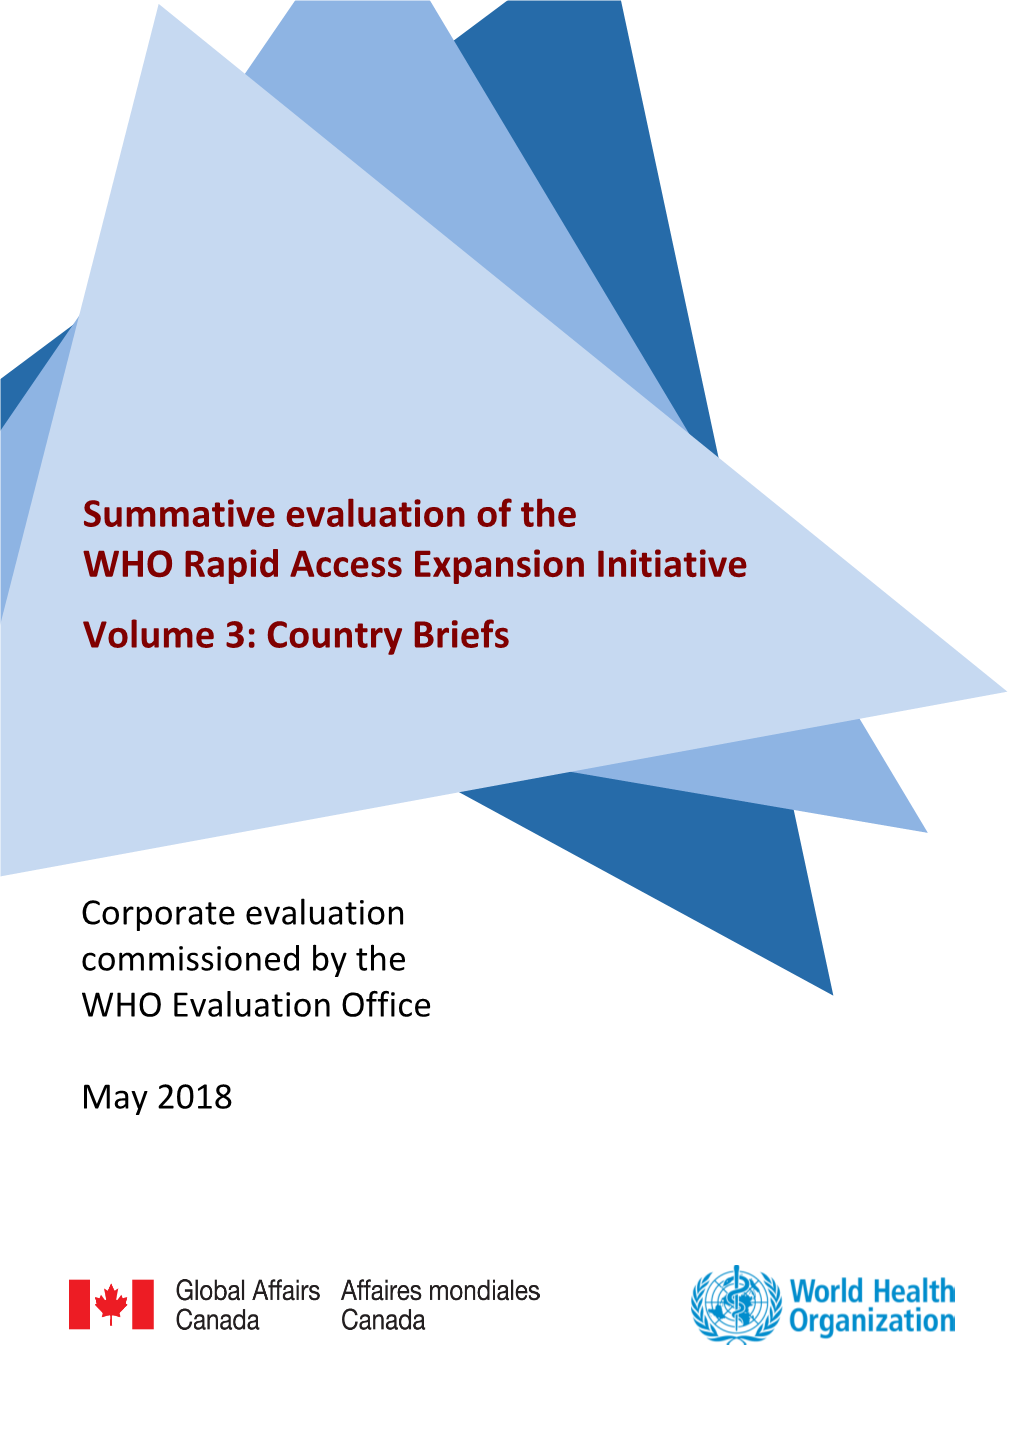 Summative Evaluation of the WHO Rapid Access Expansion Initiative Volume 3: Country Briefs